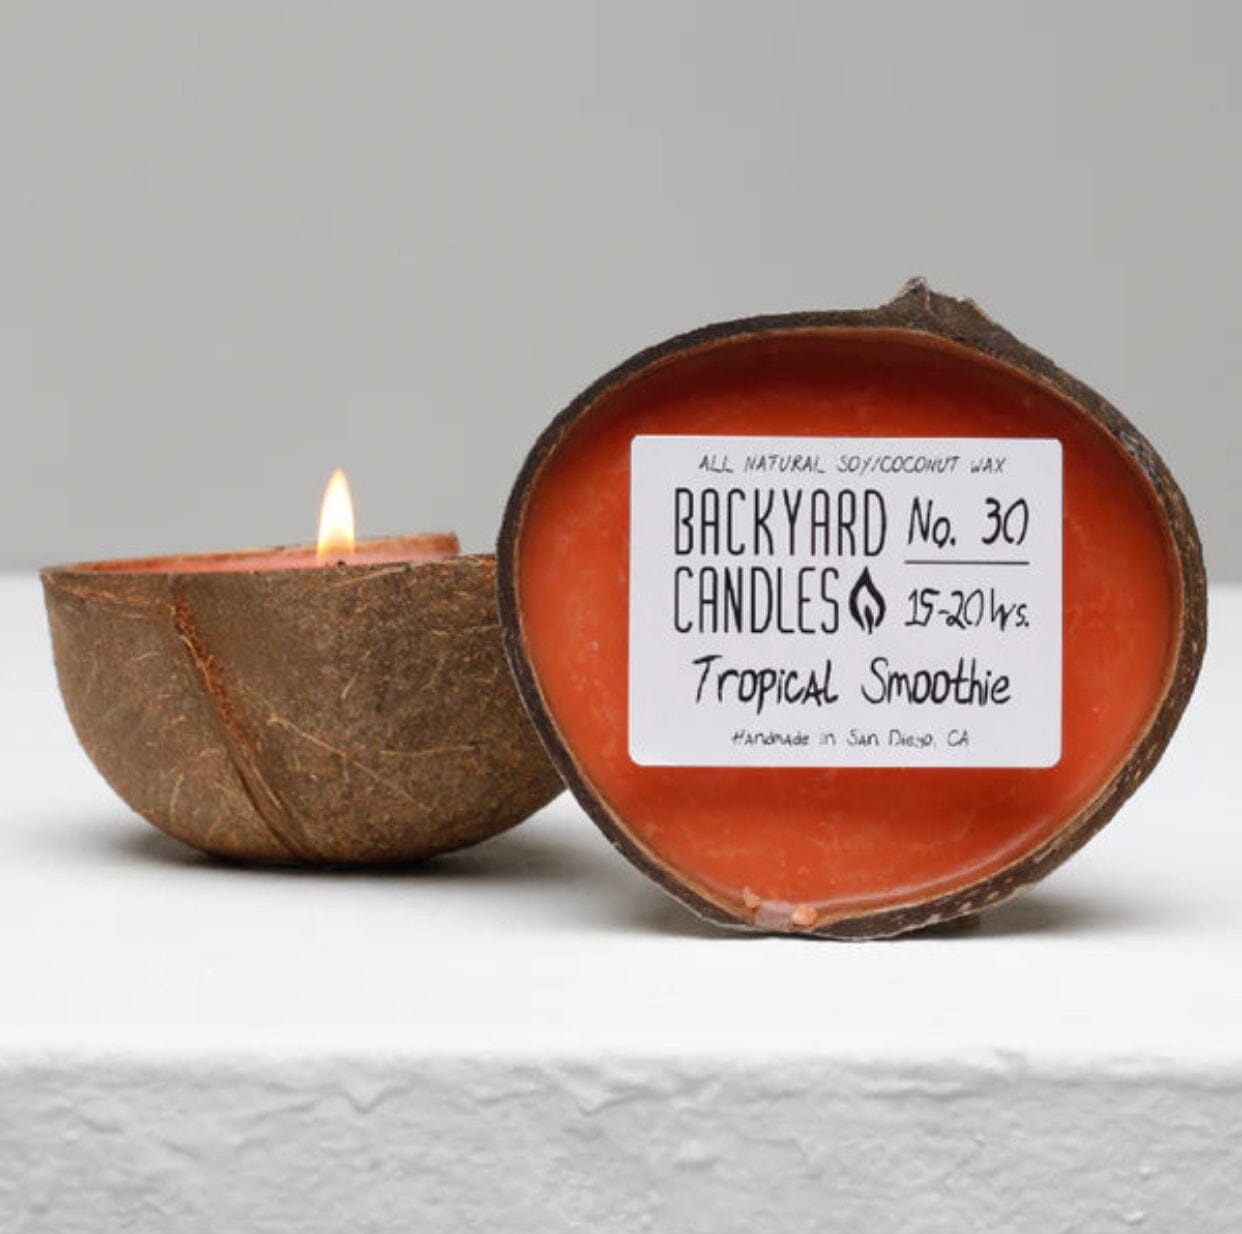 Coconut Shell Candle, Tropical Smoothie Decor Backyard Candles 